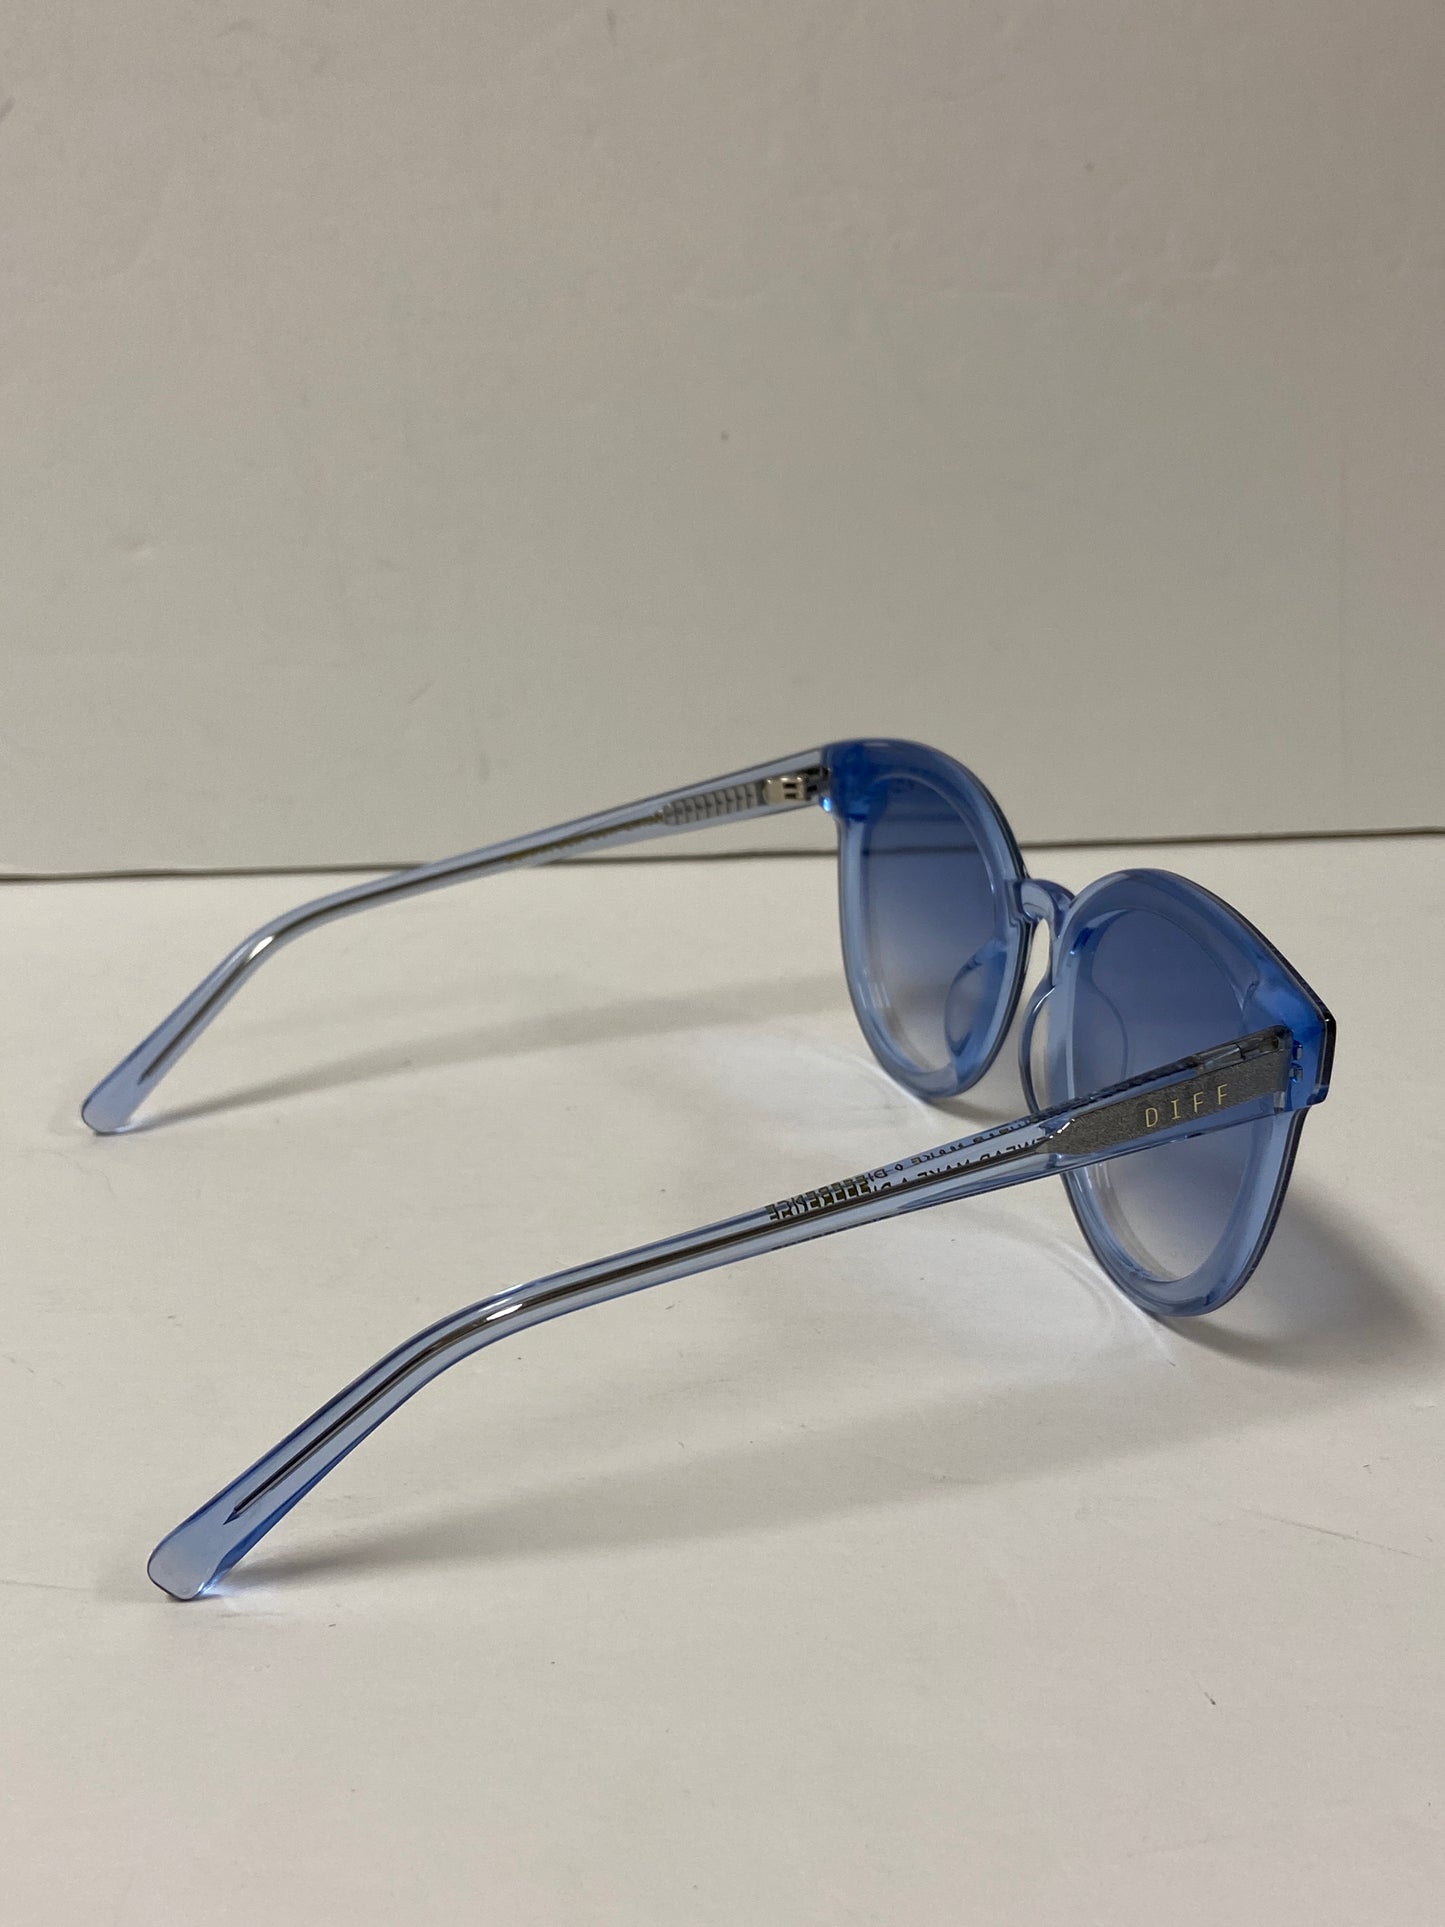 Sunglasses By Cmb